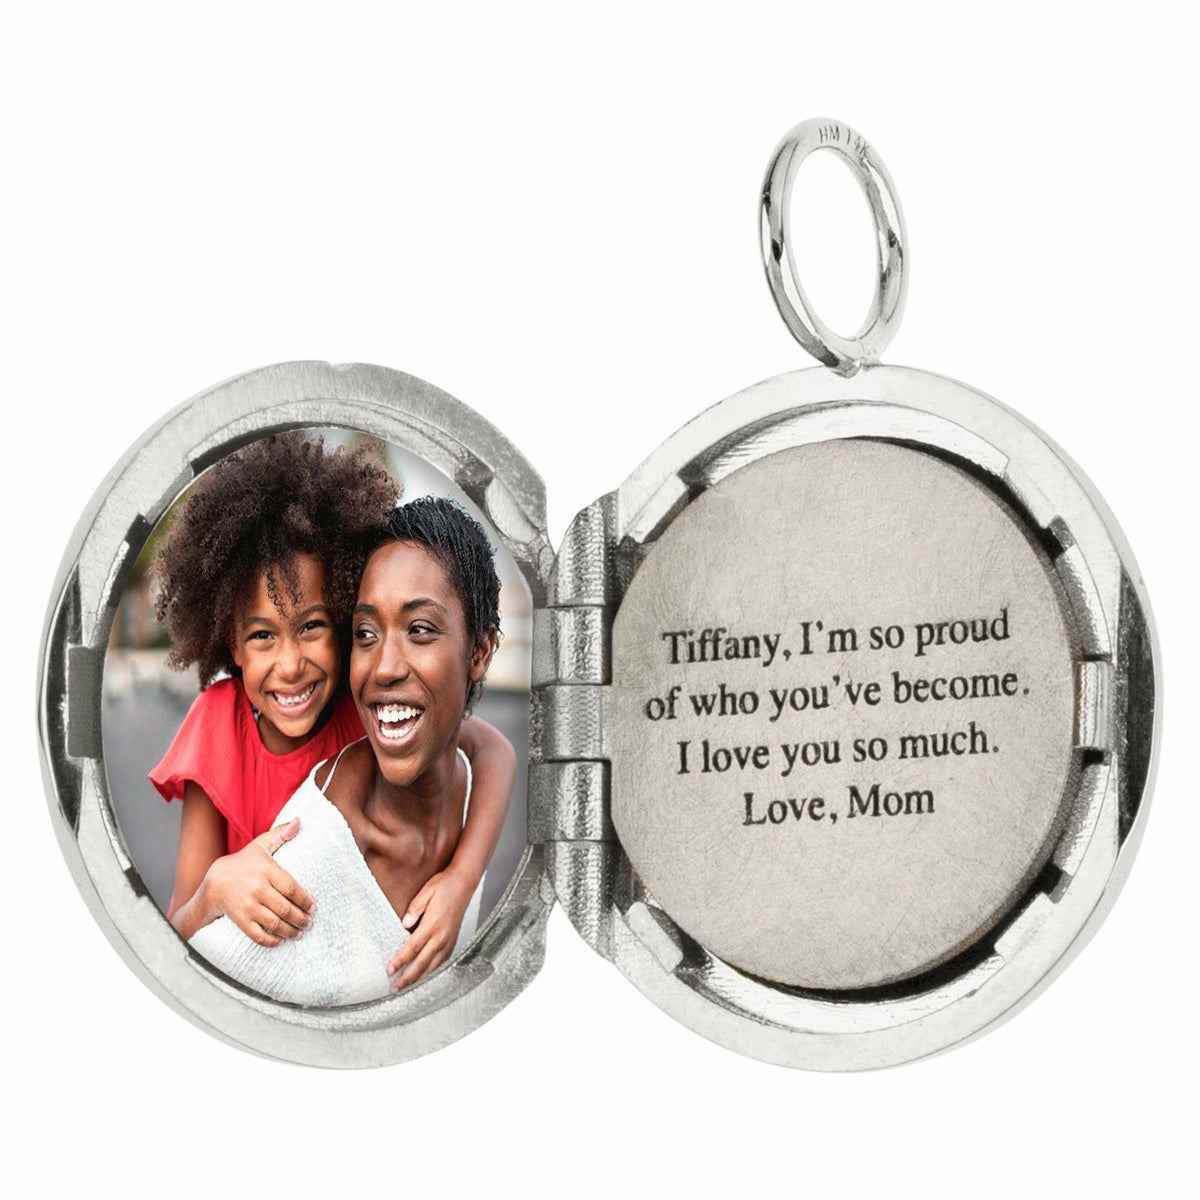 Silver Round Locket with Diamonds and a Personalized Page